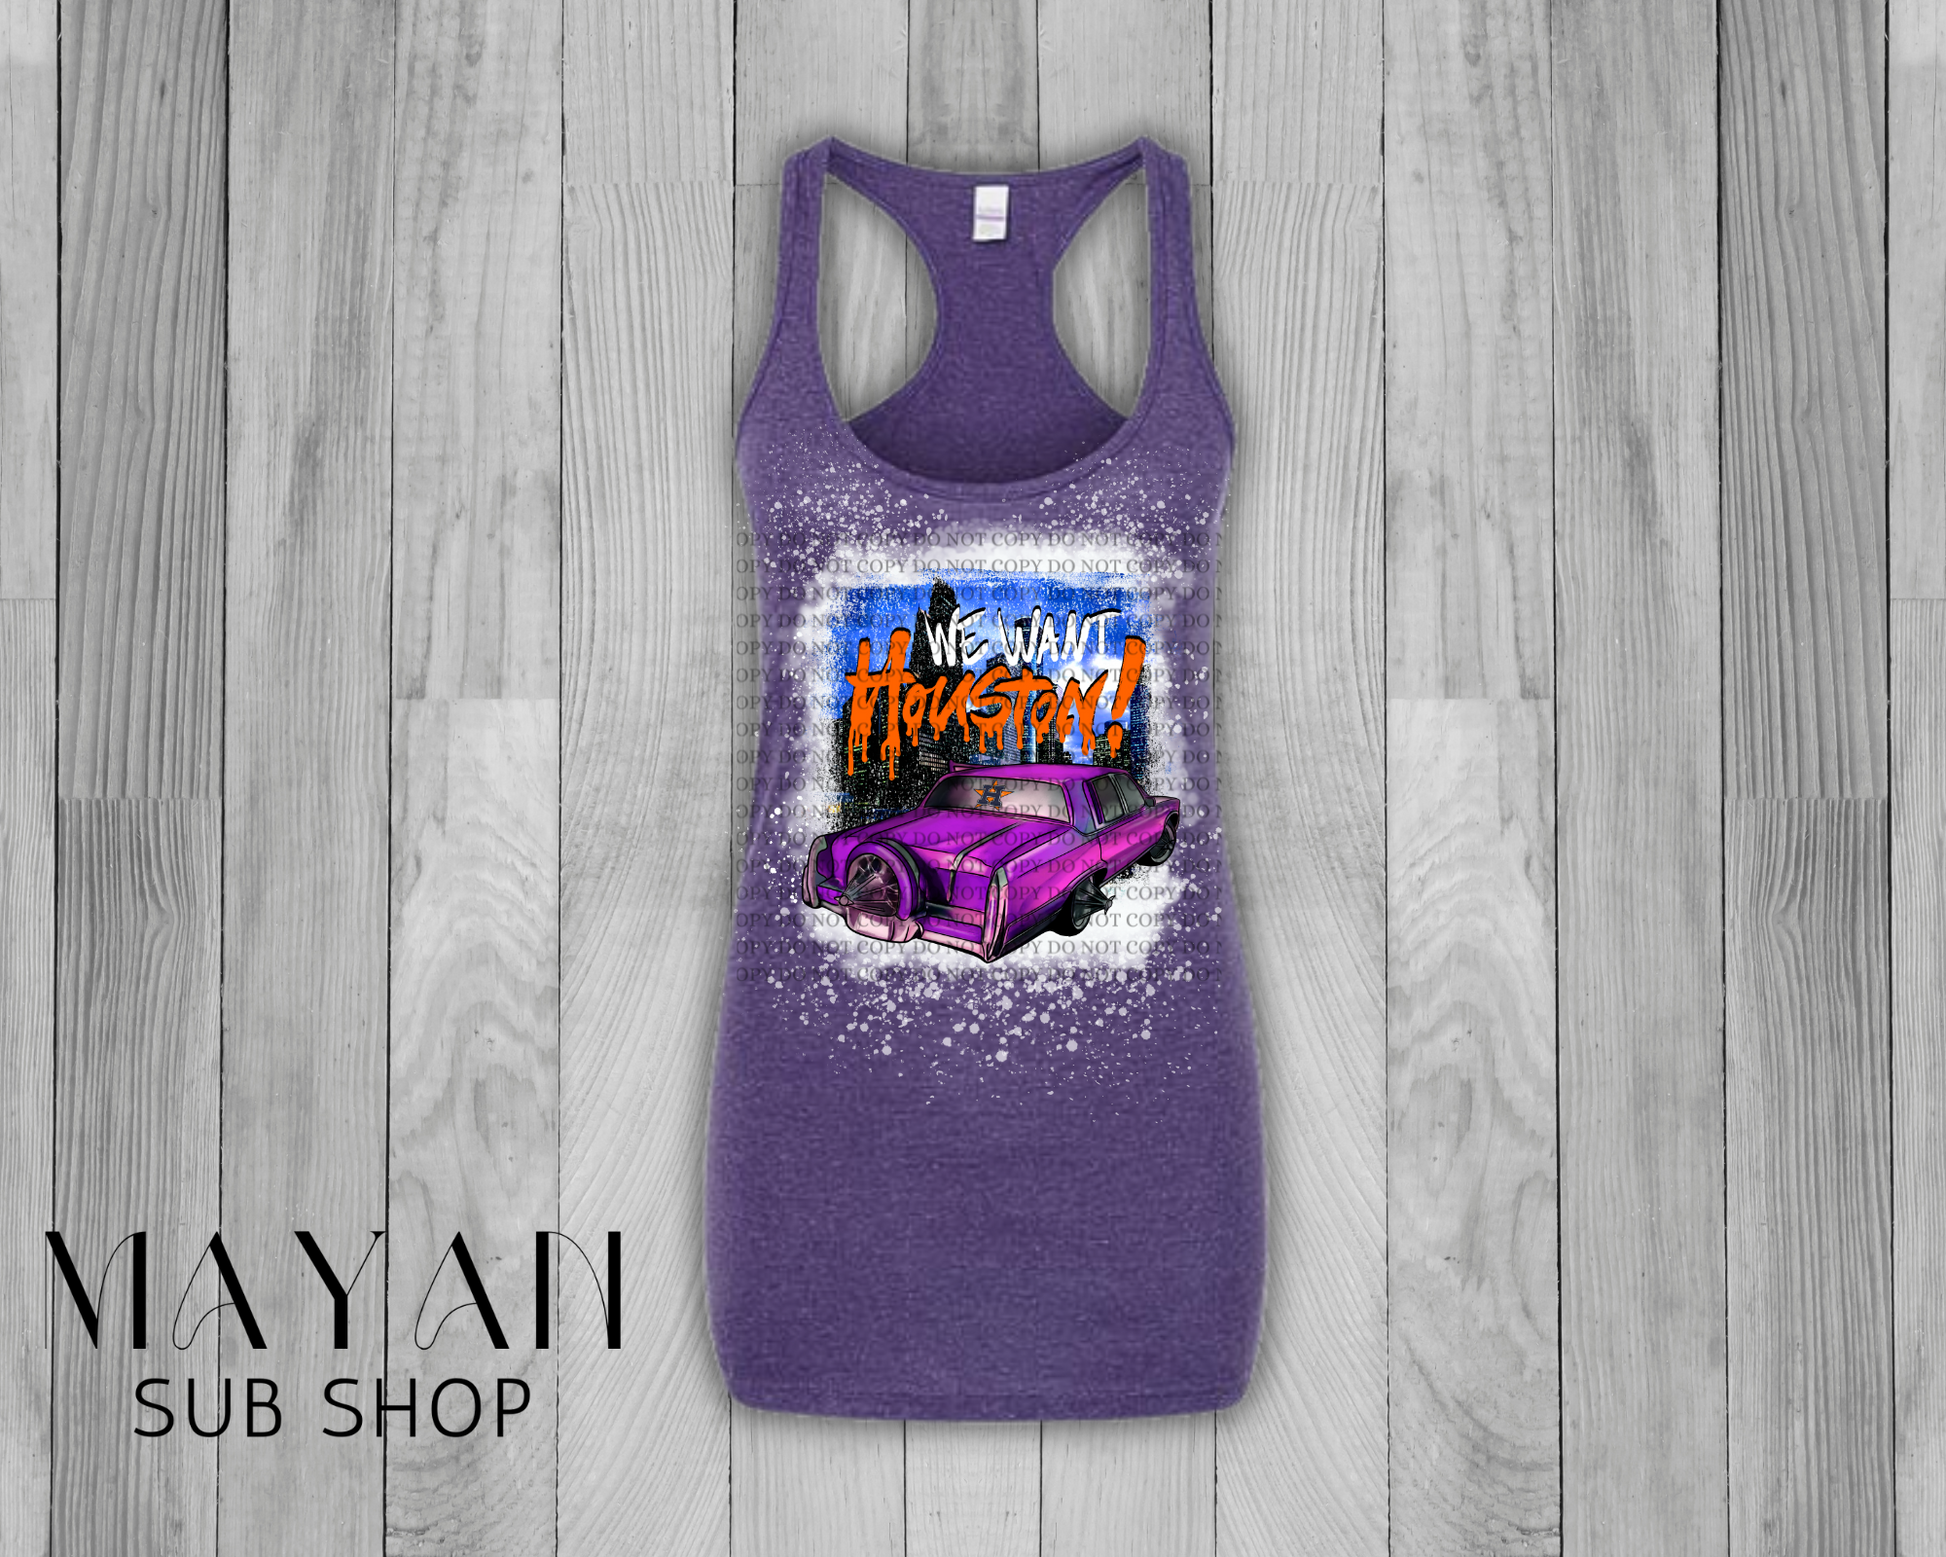 We Want Houston Bleached Tank Top - Mayan Sub Shop